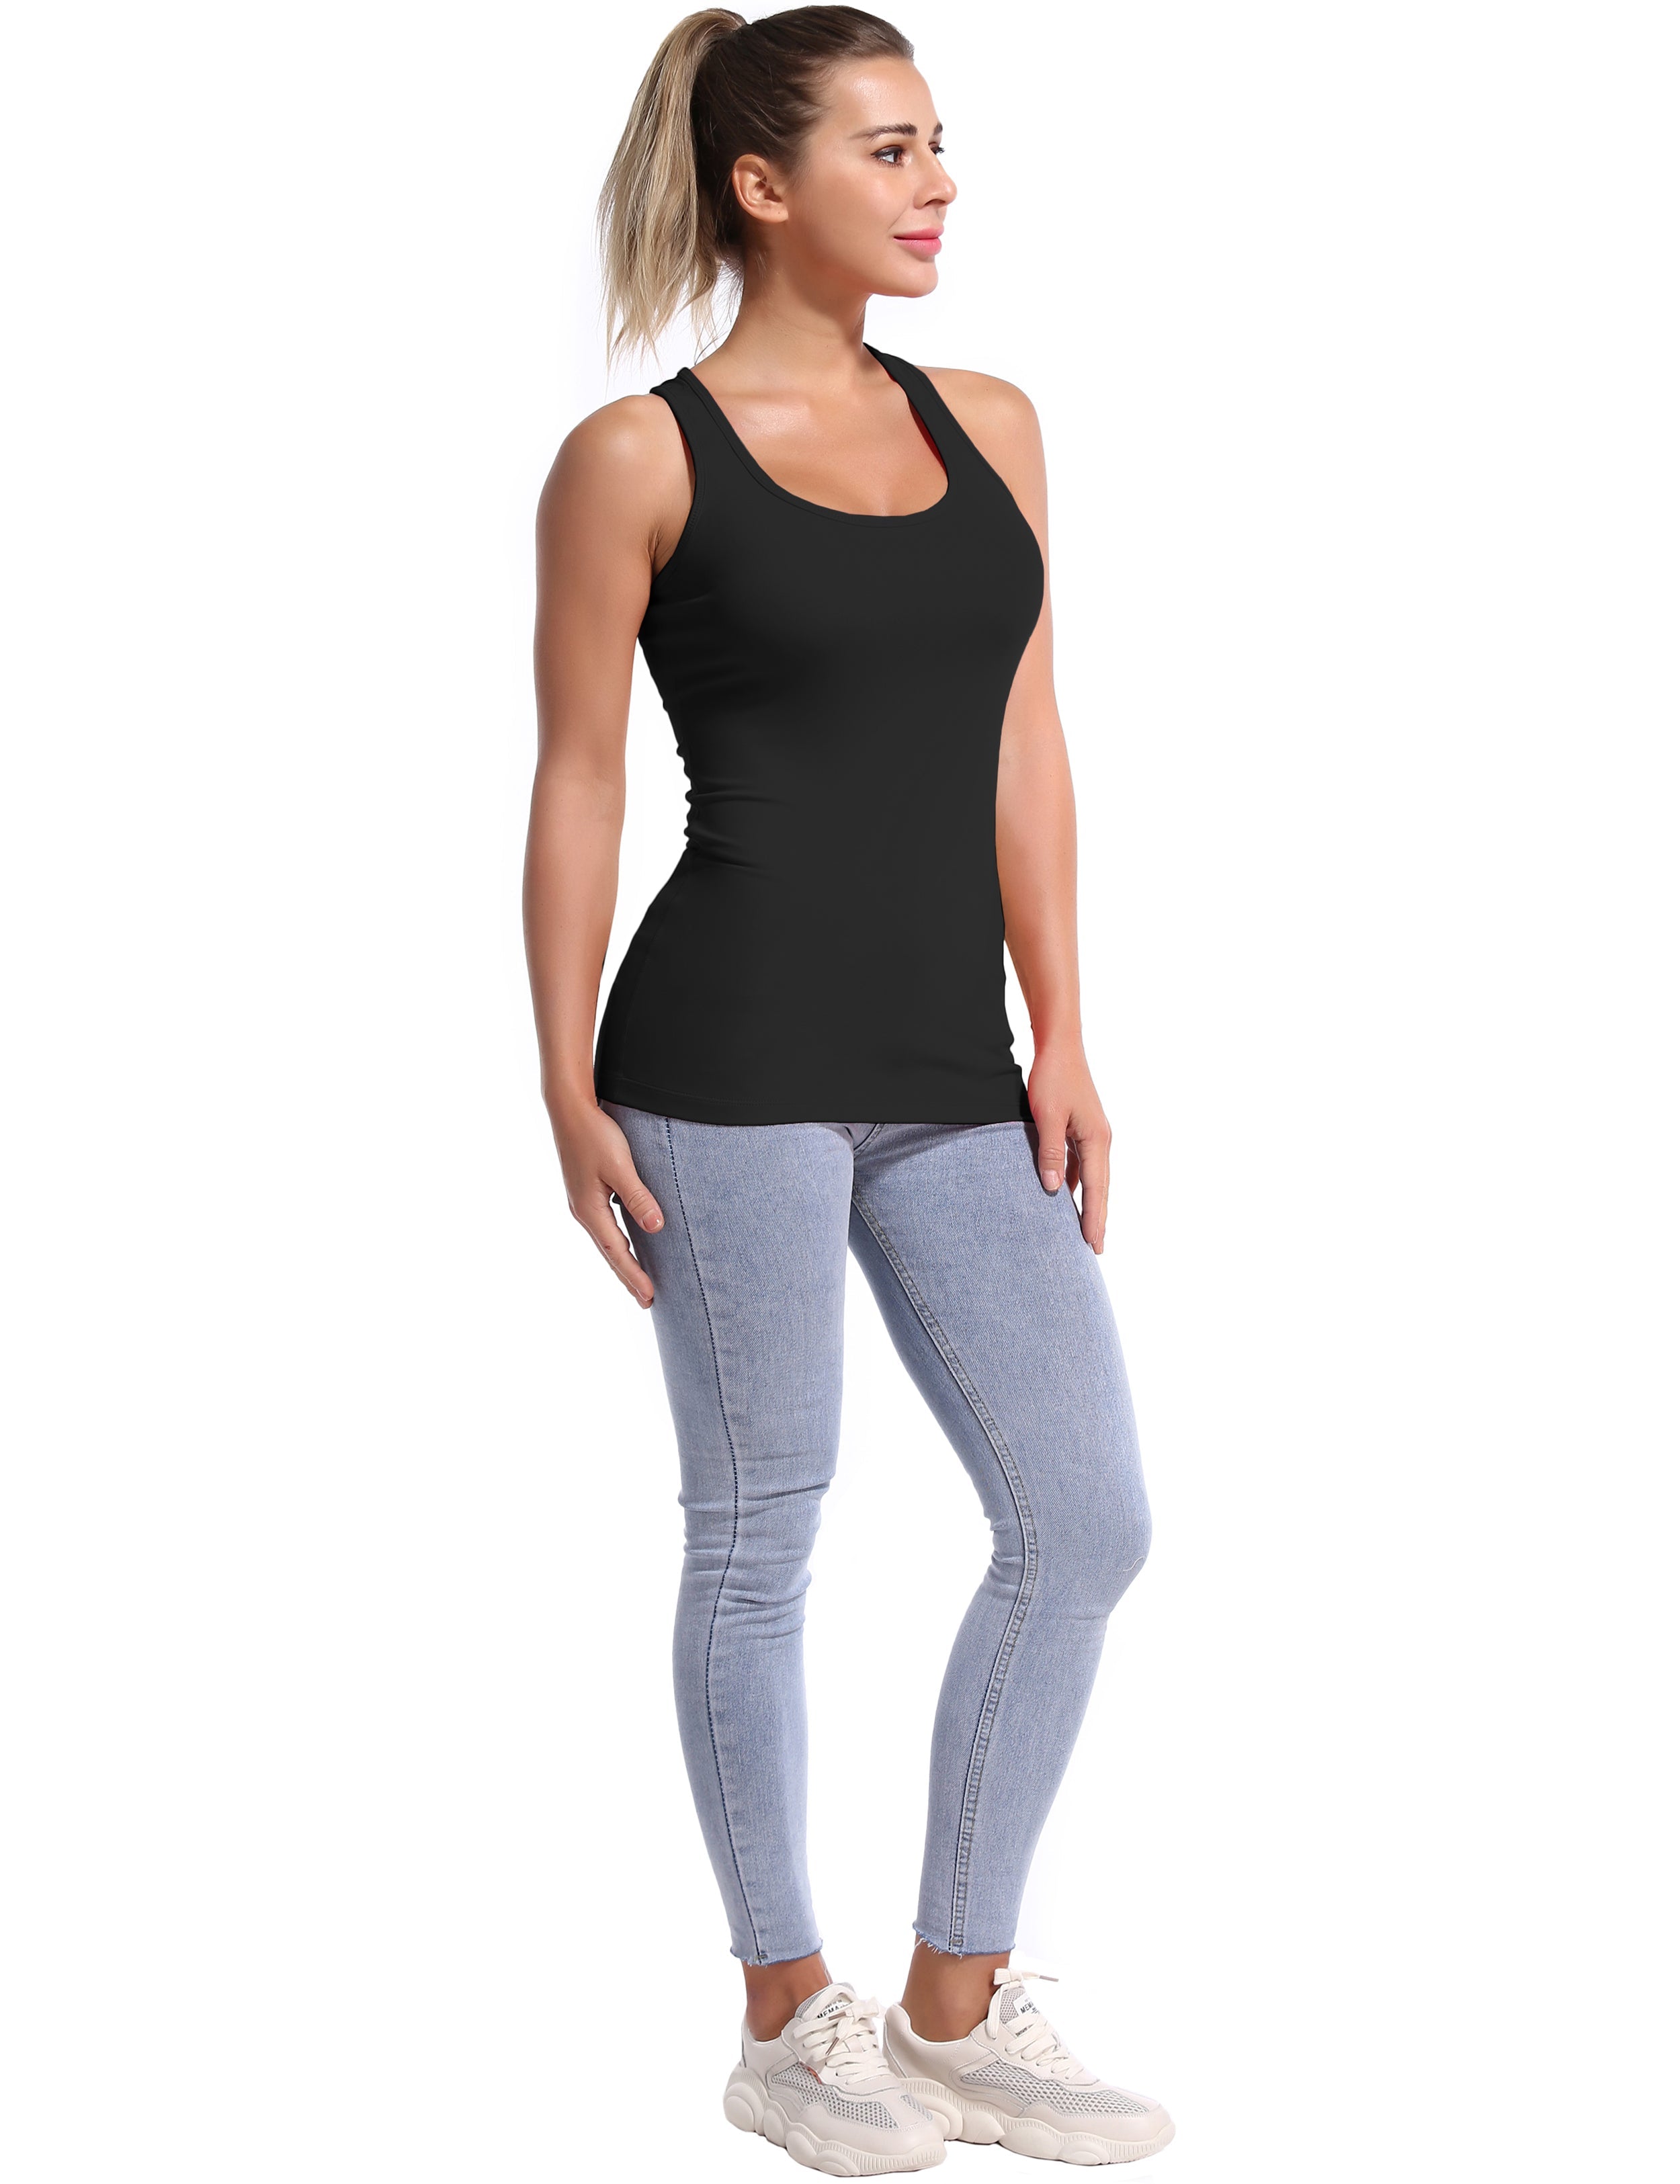 Racerback Athletic Tank Tops black 92%Nylon/8%Spandex(Cotton Soft) Designed for Jogging Tight Fit So buttery soft, it feels weightless Sweat-wicking Four-way stretch Breathable Contours your body Sits below the waistband for moderate, everyday coverage